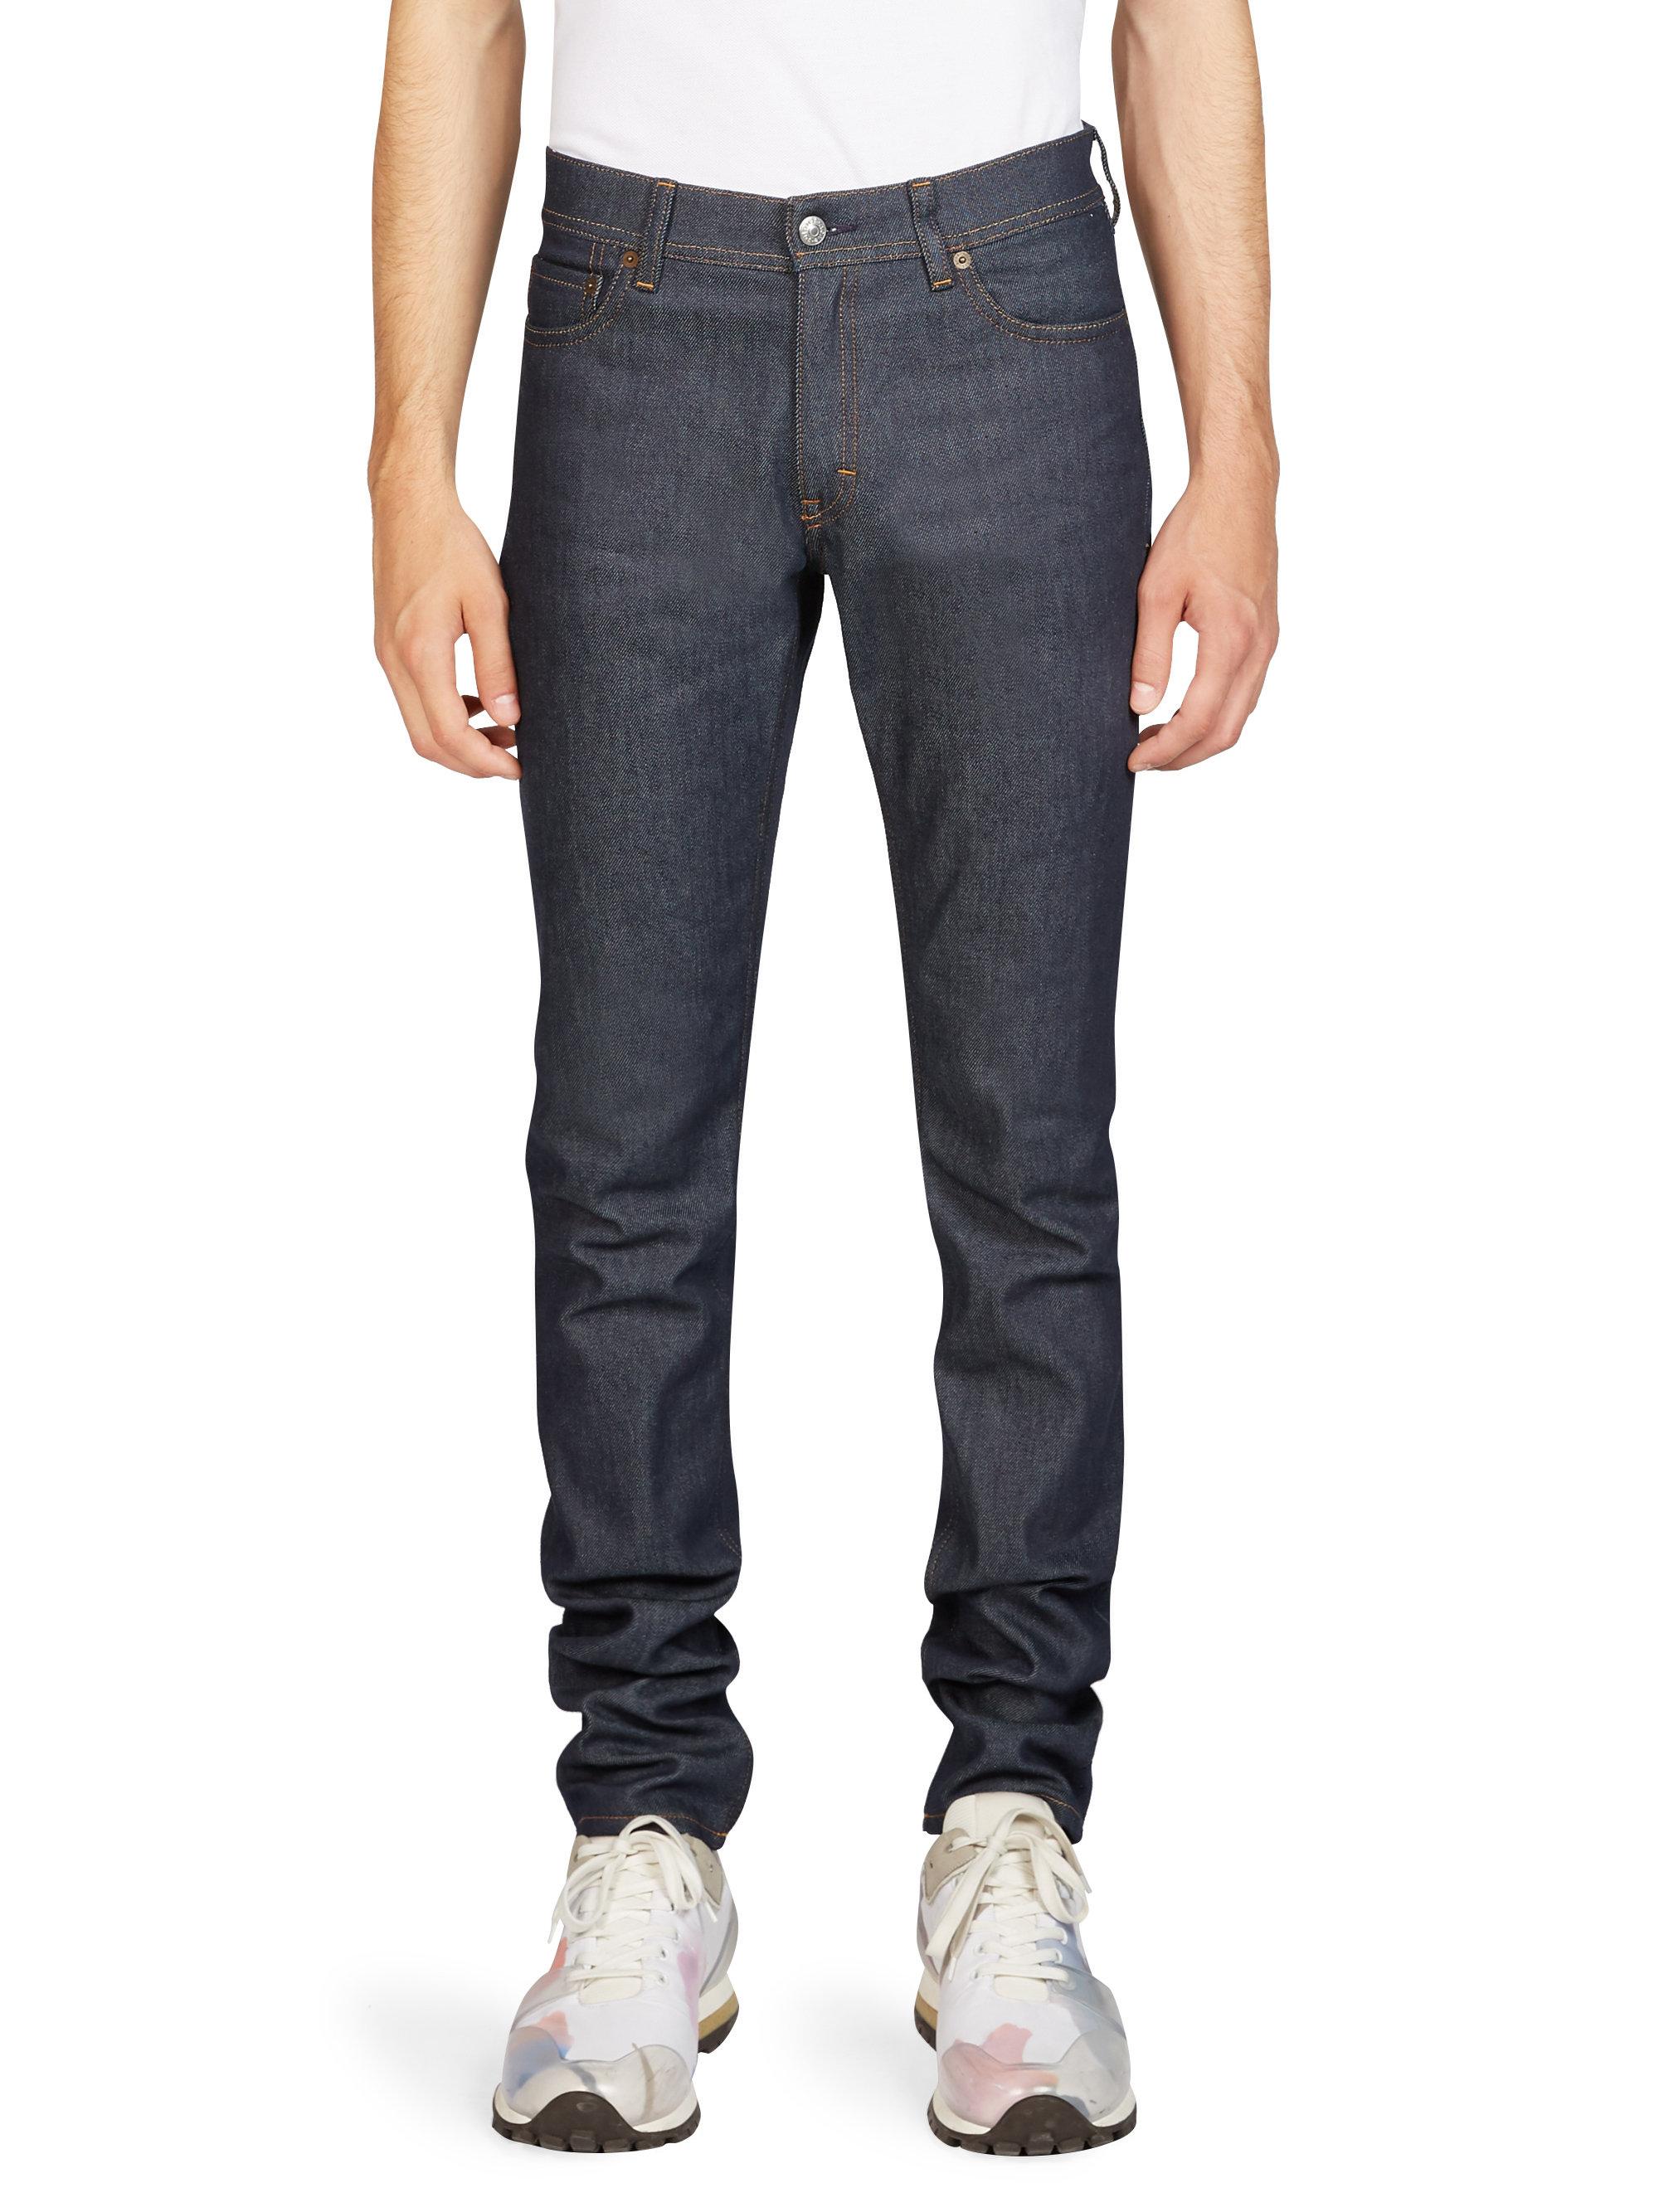 Acne Studios North Classic Jeans in Blue for Men - Lyst